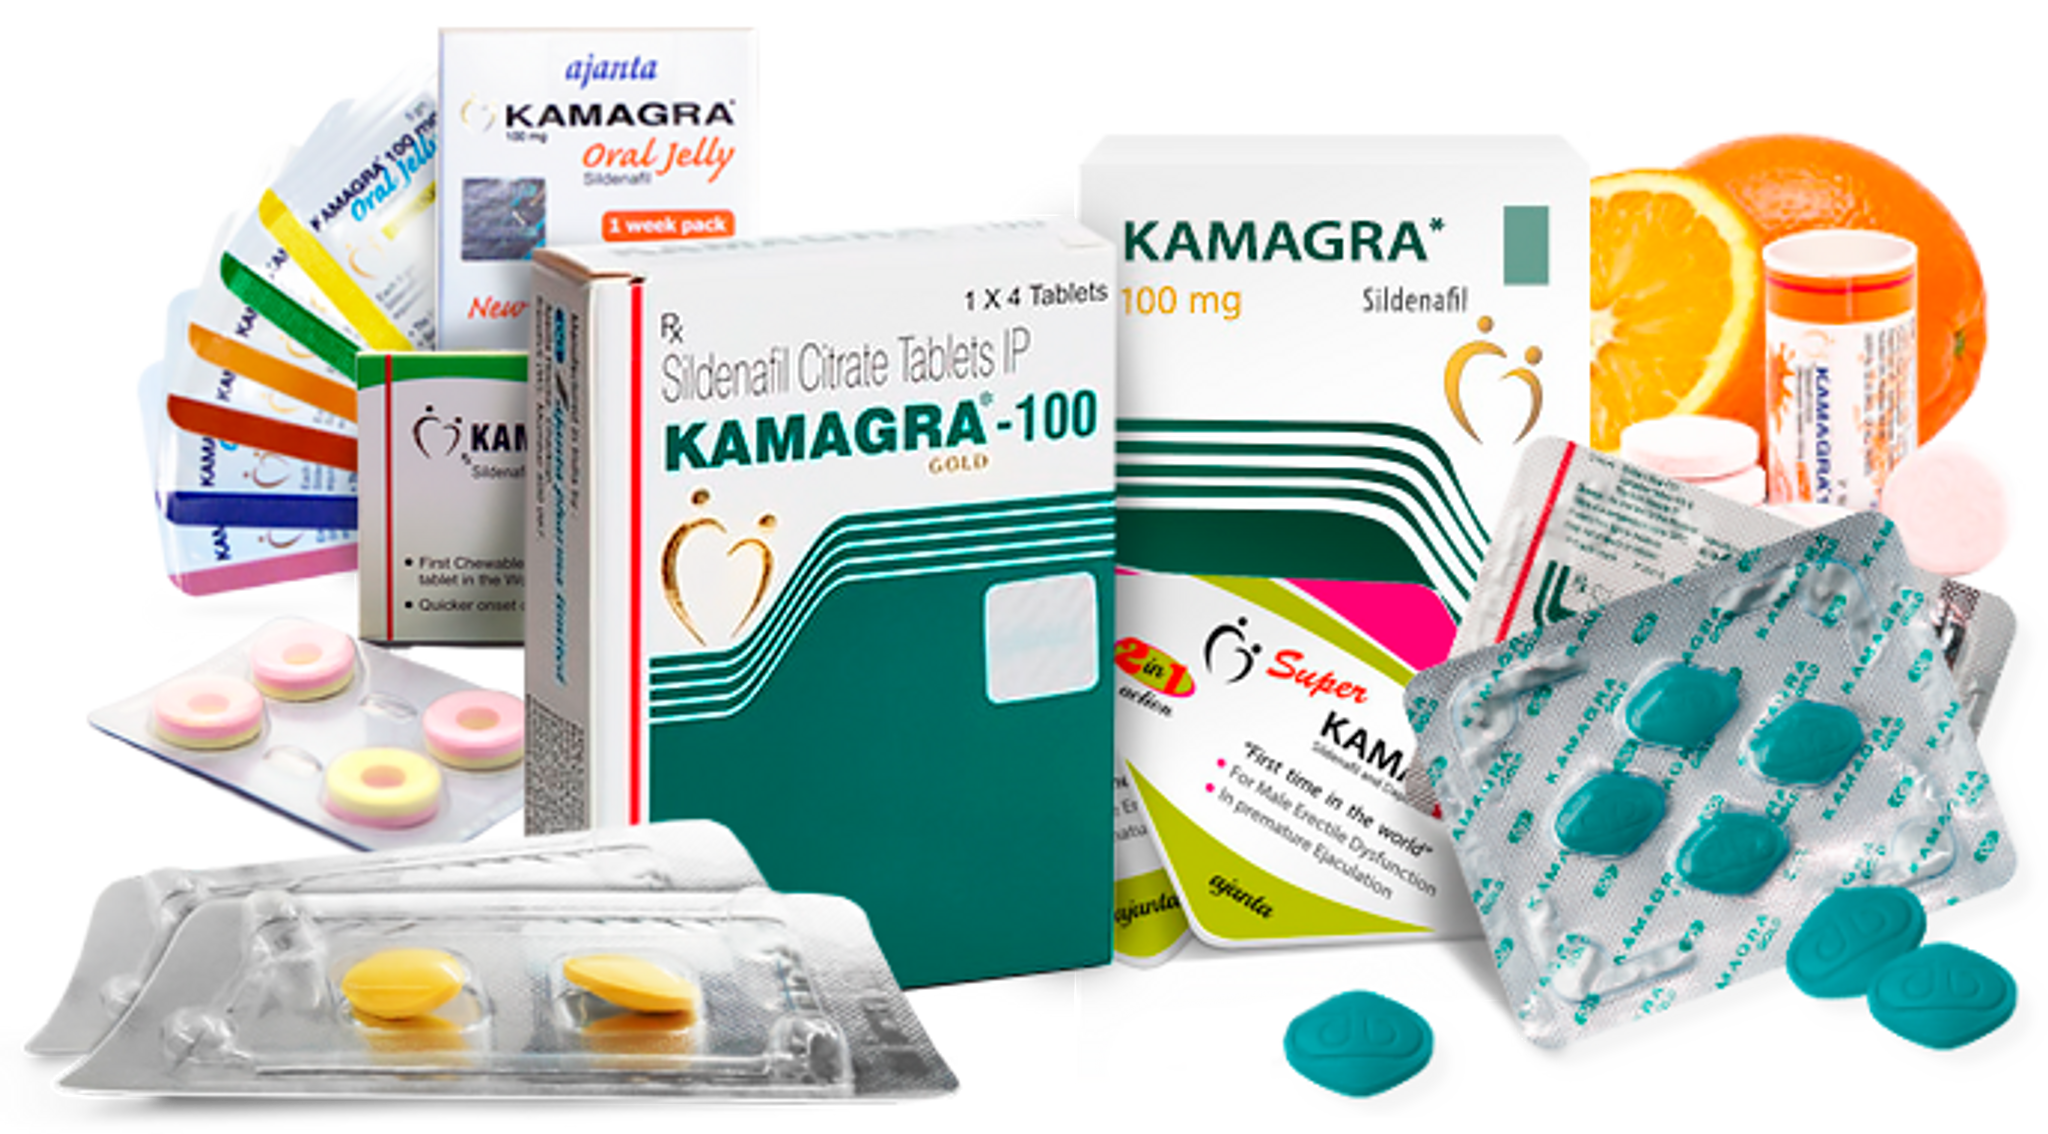 KAMAGRA {VI@GRA}: The Complete Guide to Use Kamagra Viagra Pills to Treat  Premature Ejaculation, Erectile Dysfunction, Performance Anxiety and Last